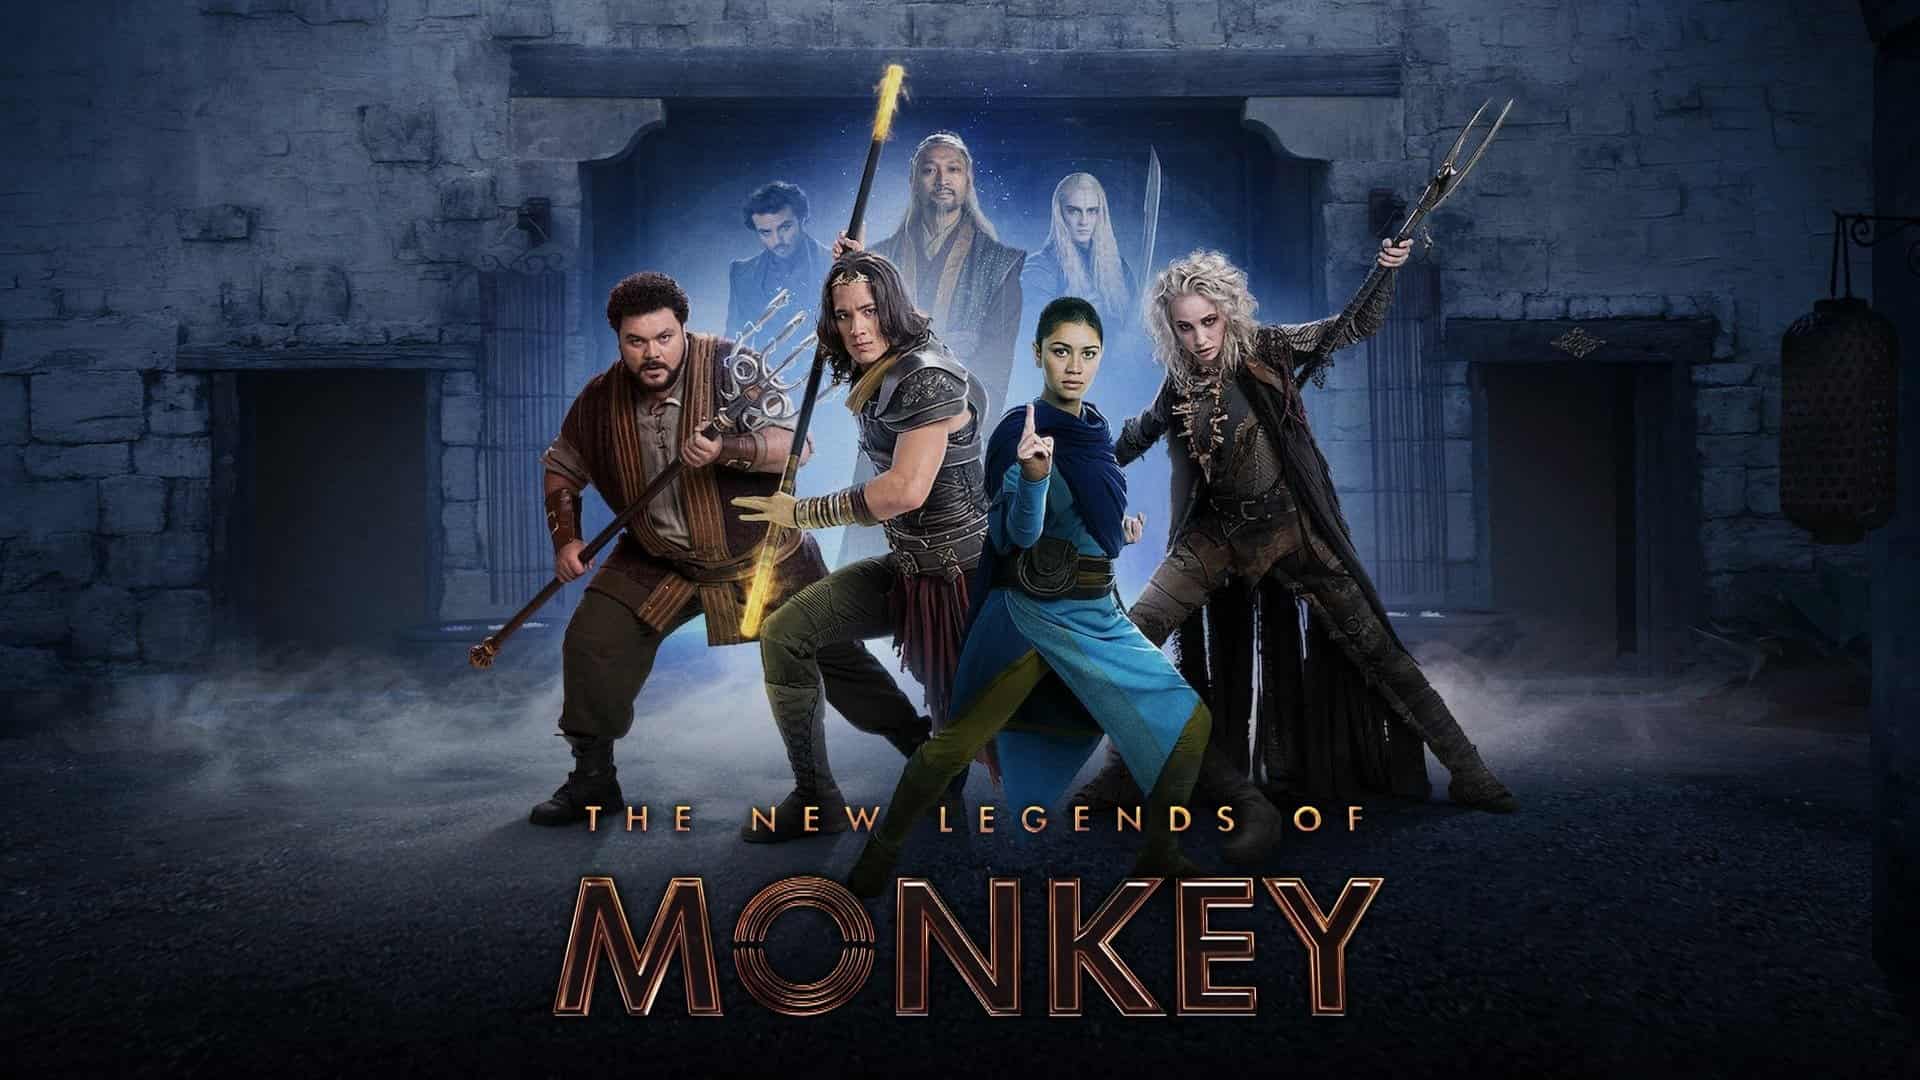 The new legends of monkey